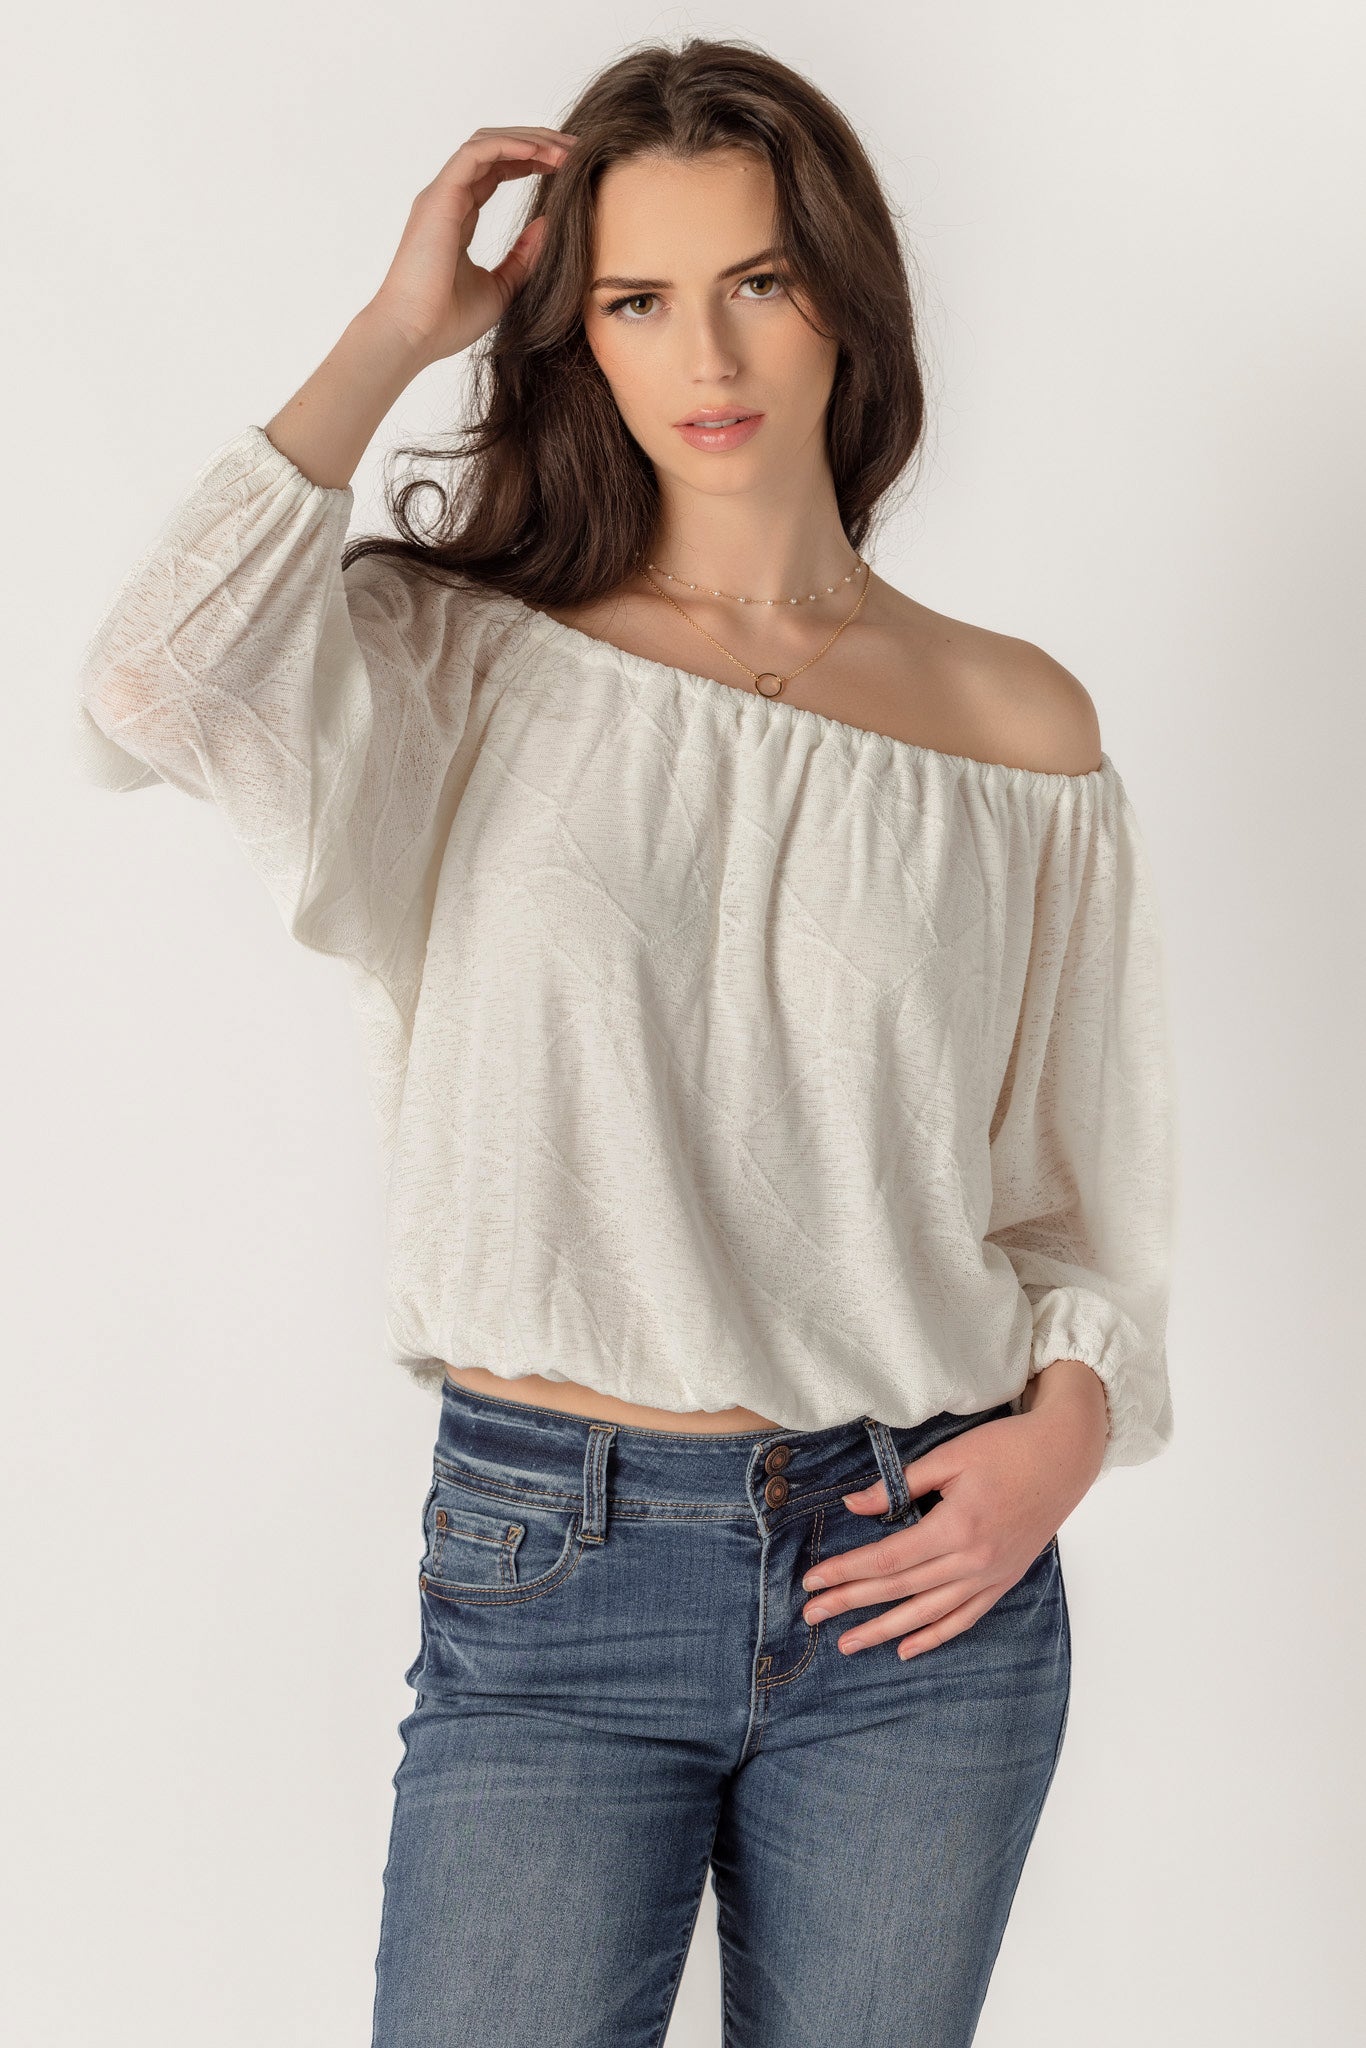 Textured Knit Off-the-Shoulder Blouse